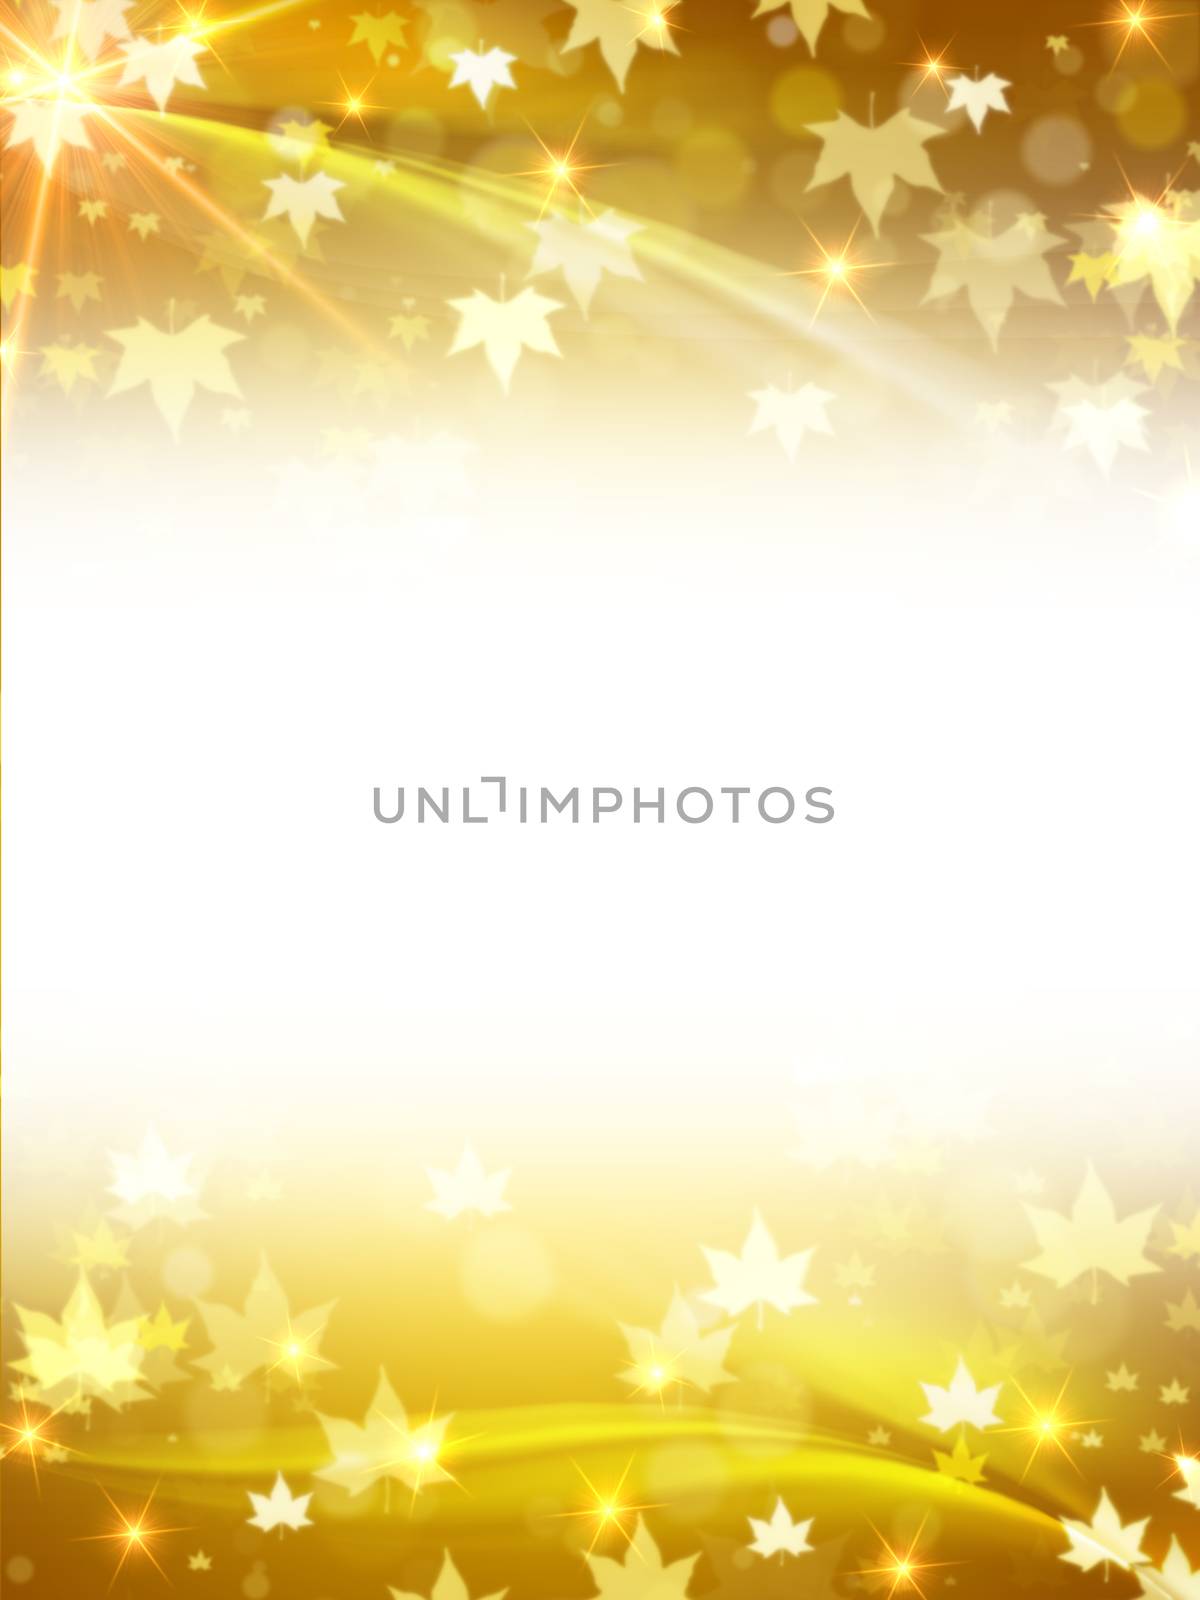 background with autumn leaves with stars, lights and rays